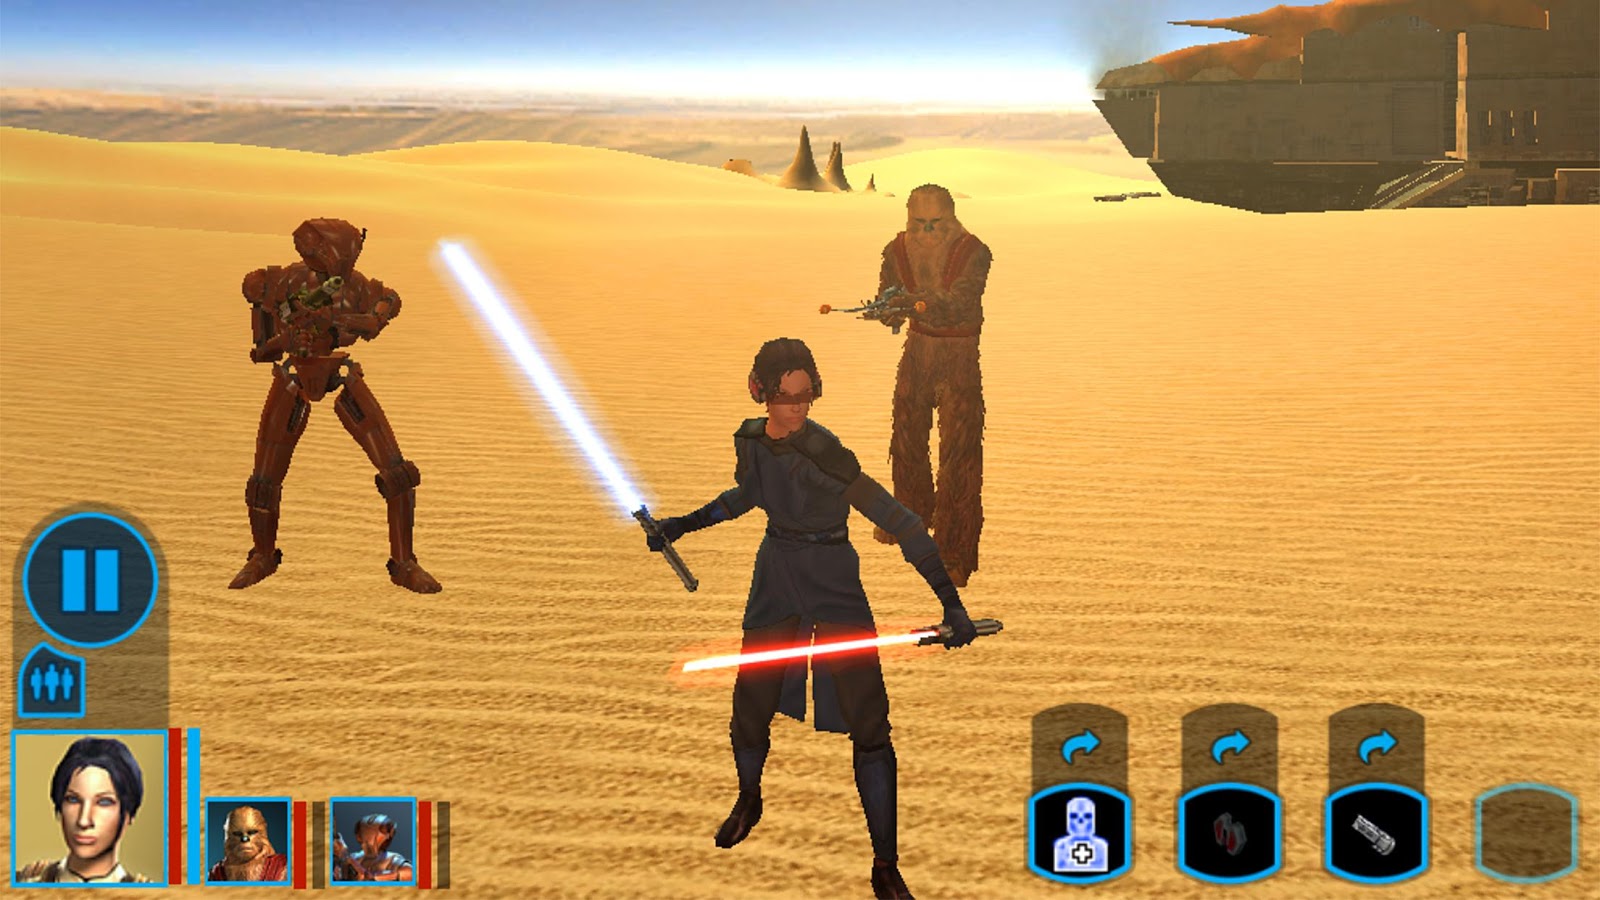 Lego Star Wars APK (Android App) - Free Download